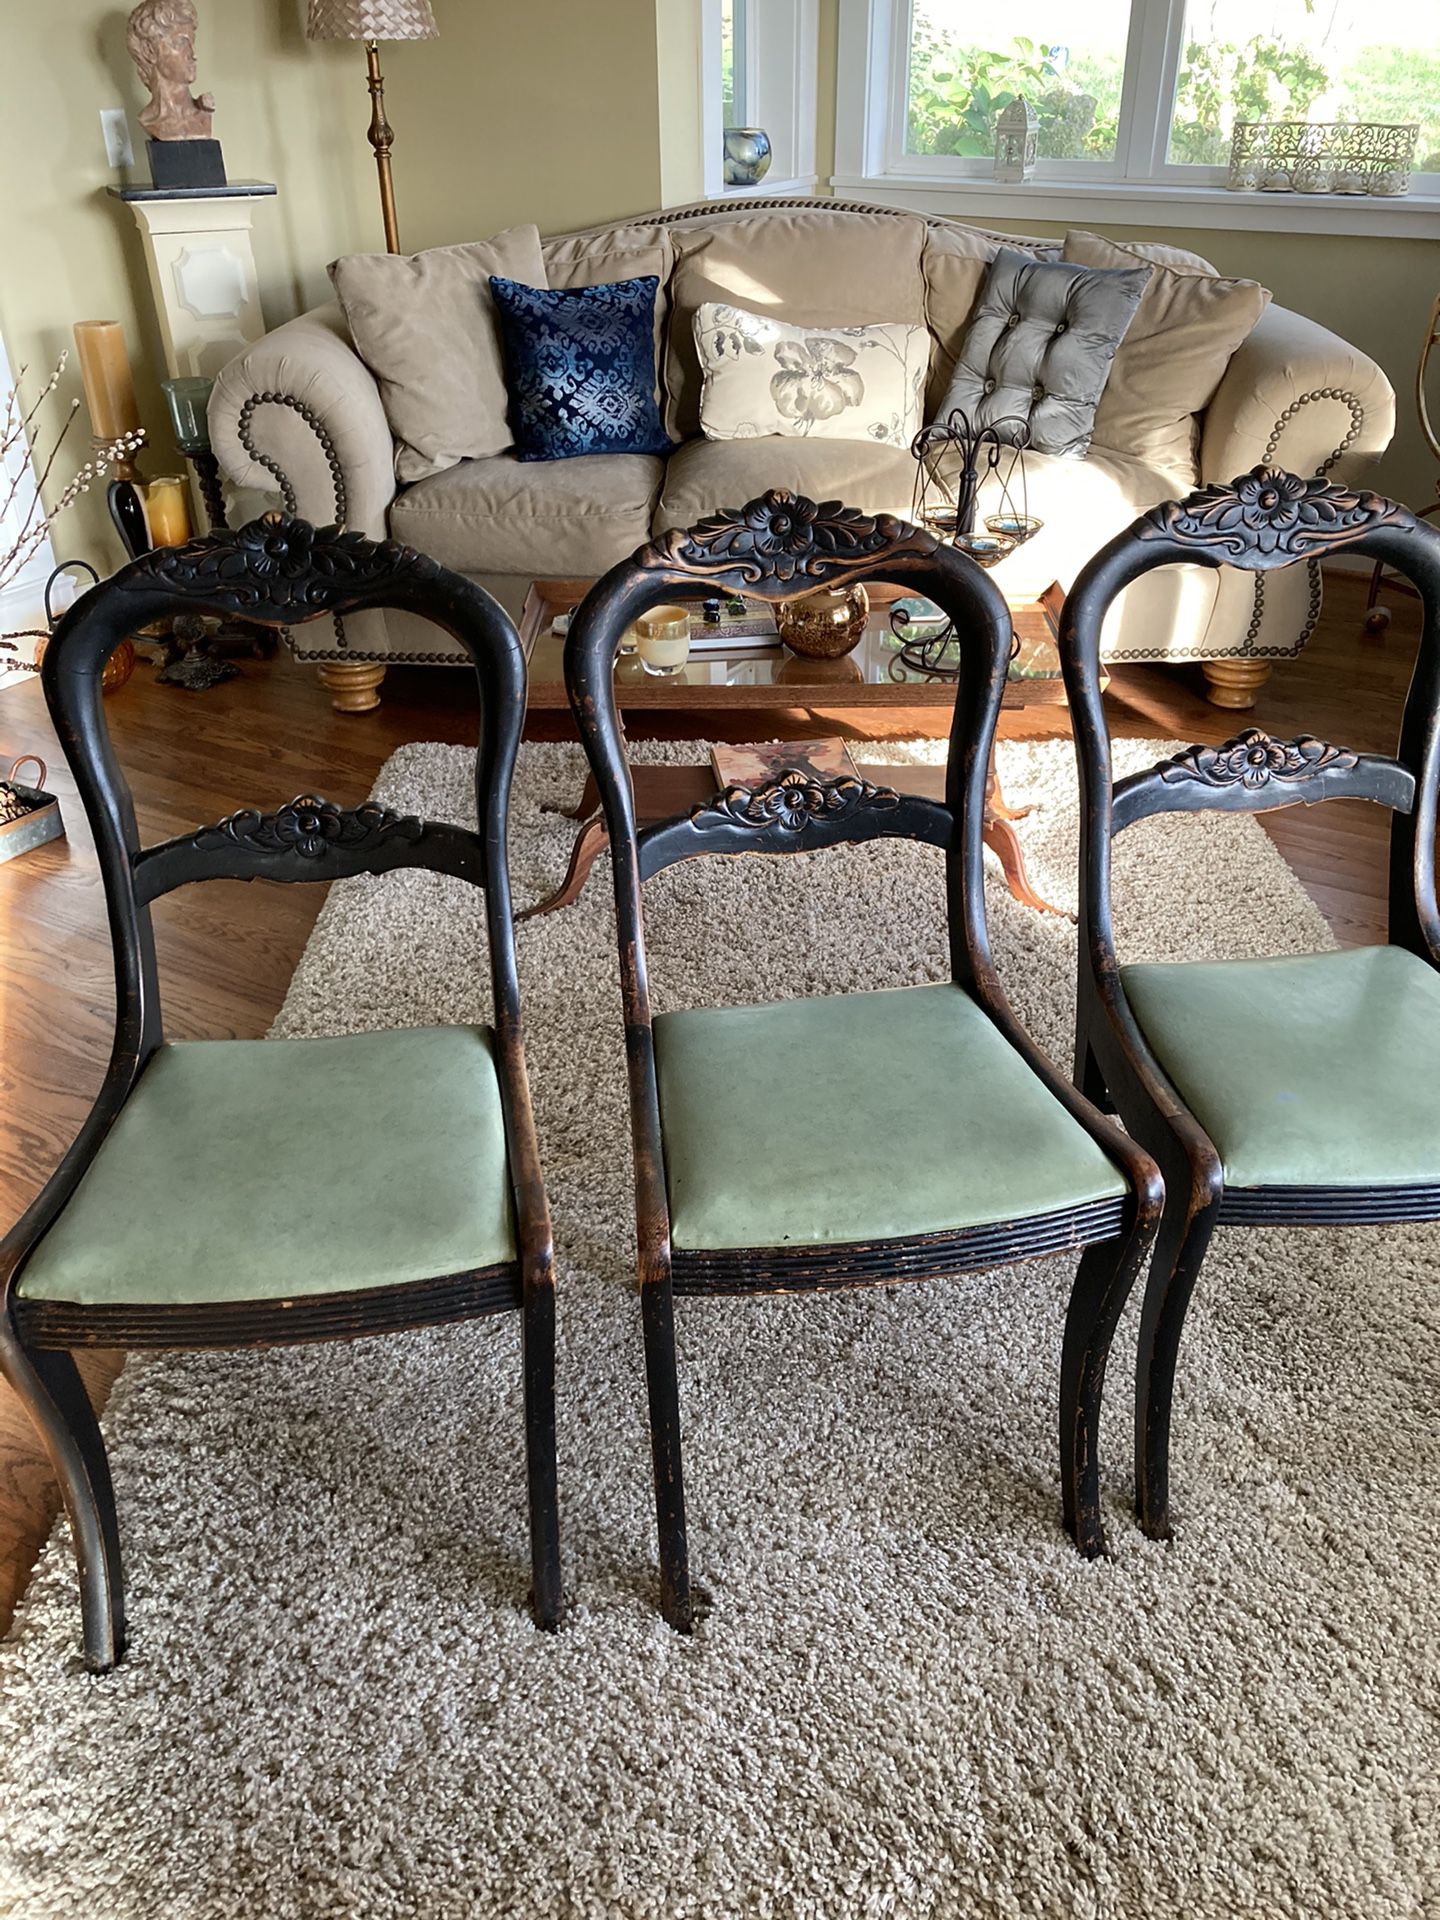 4 Cute Black Antique Chairs With Black Leather Seats